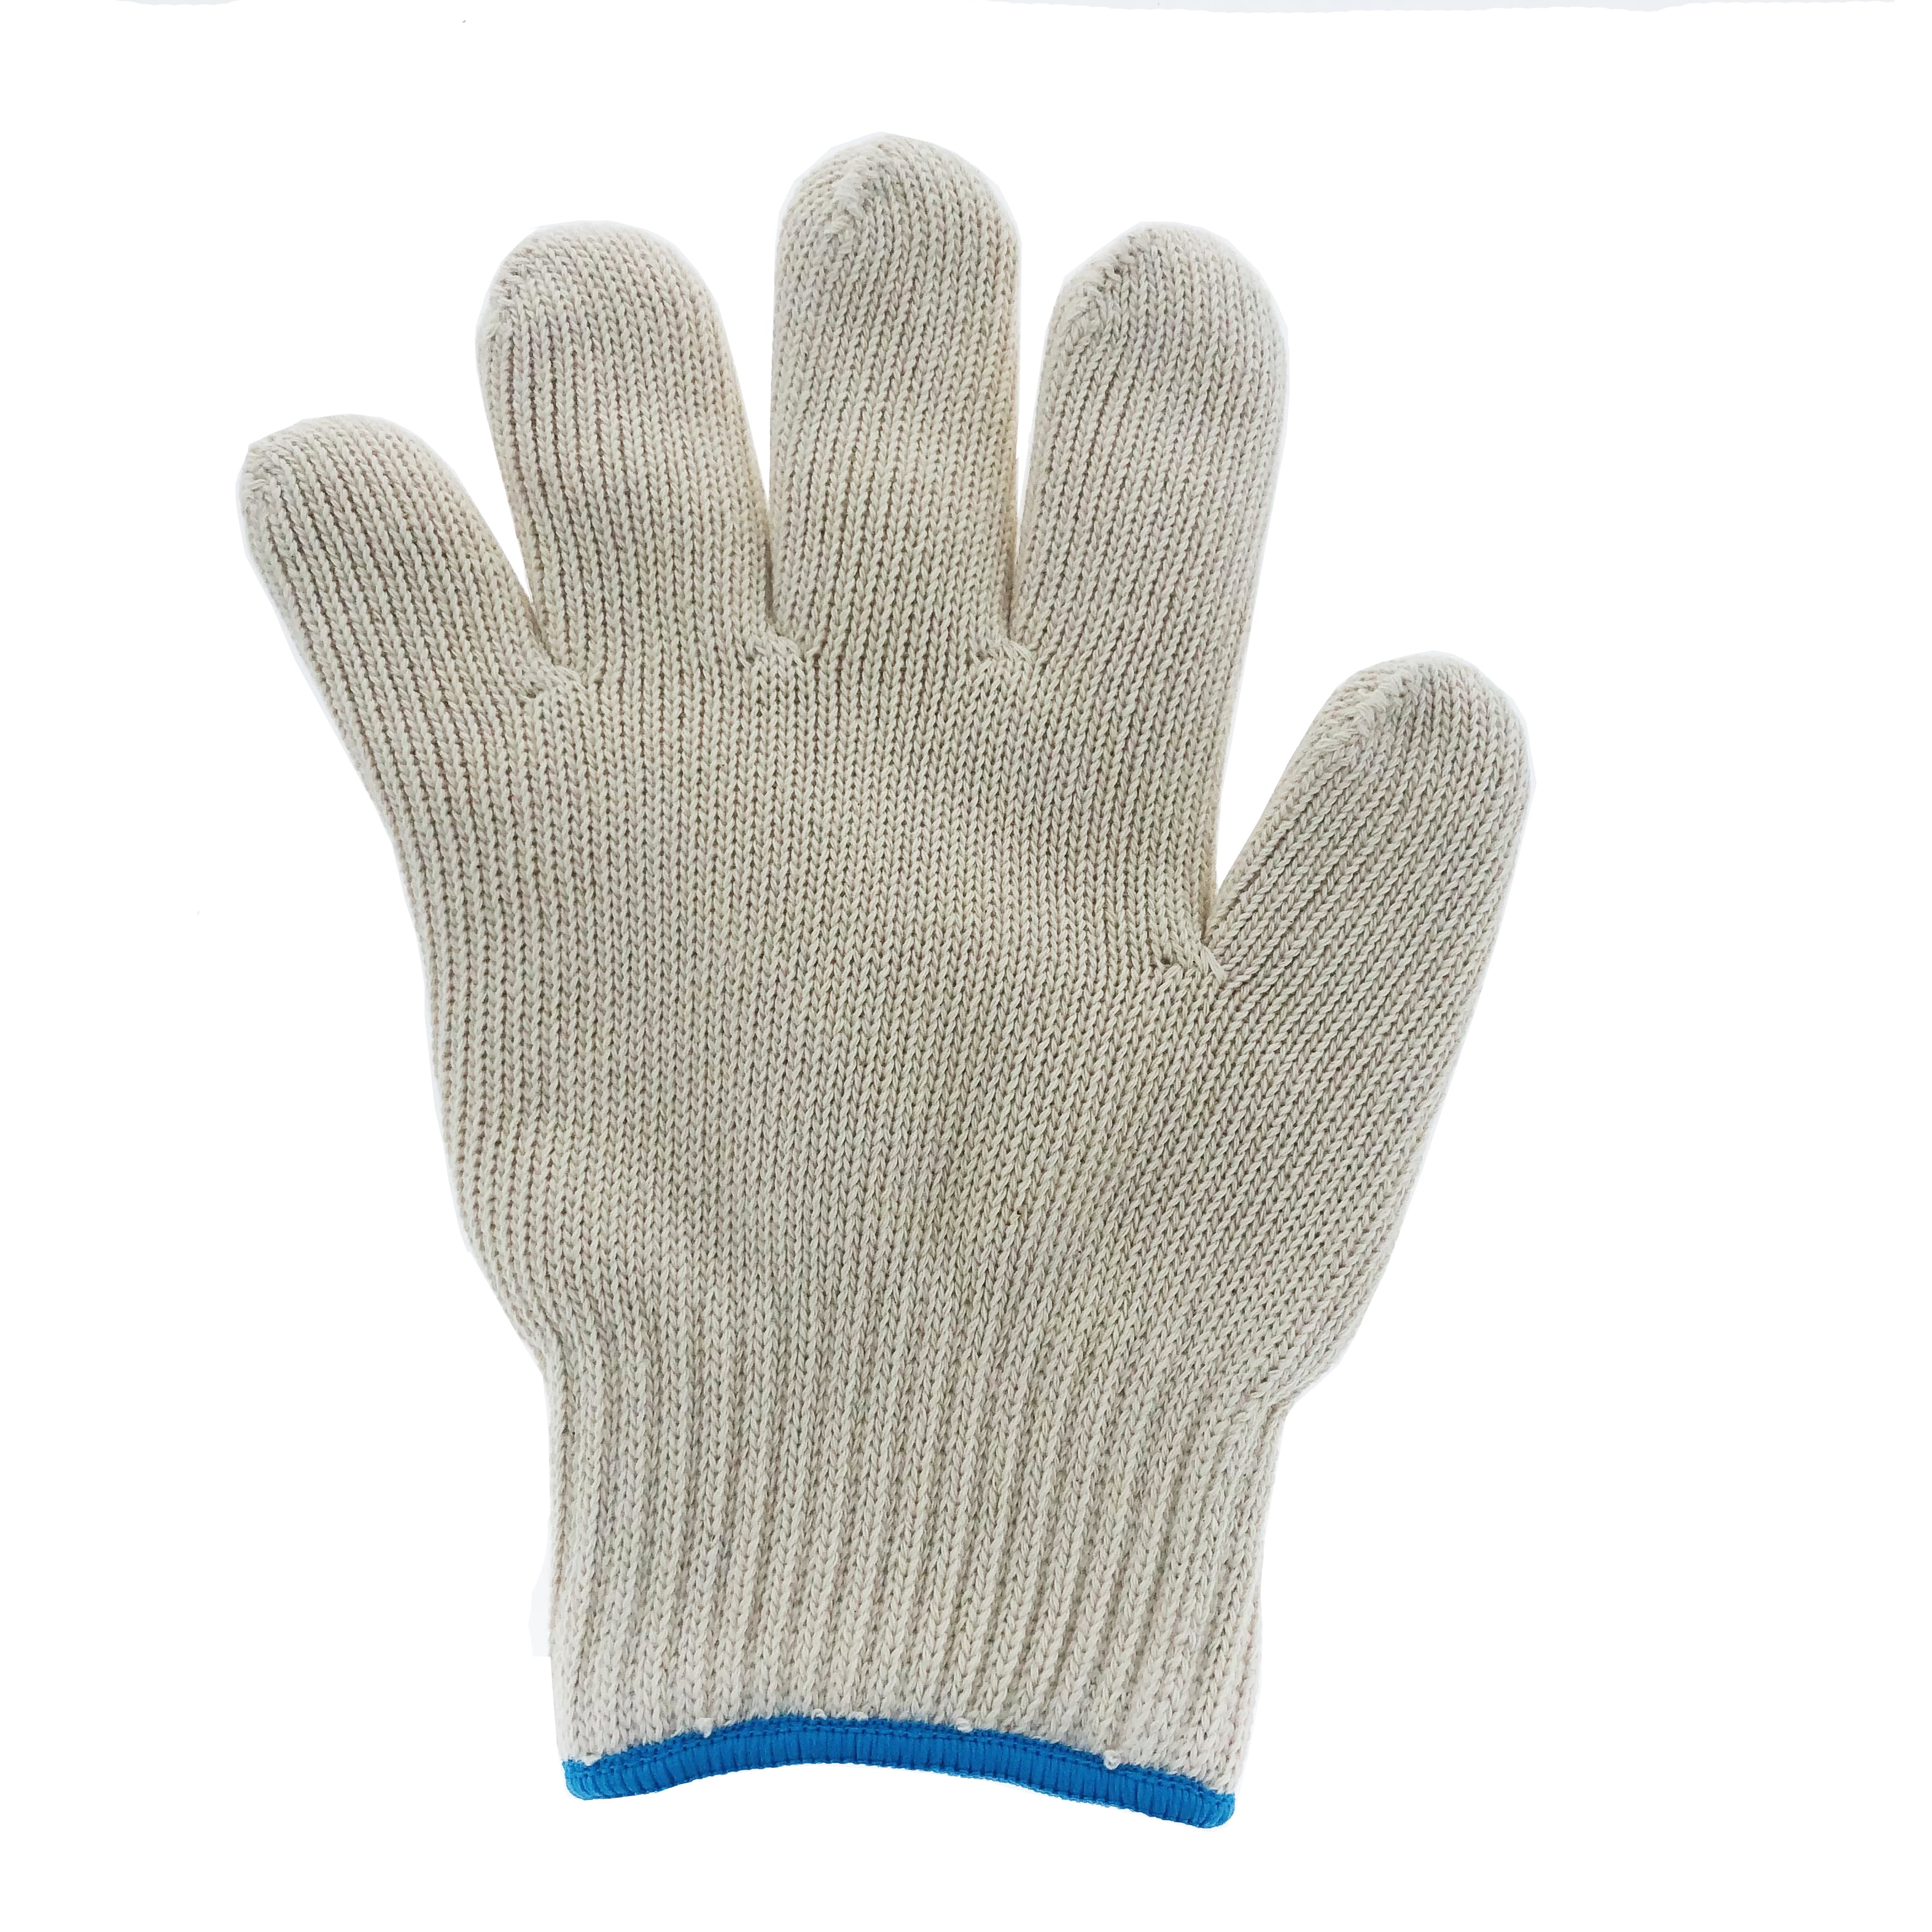 Bakery Heat Resistance Baking Insulated Oven Gloves Pair Silver White -  10.6 x 5.9 x 2(L*W*H) - Bed Bath & Beyond - 18440479